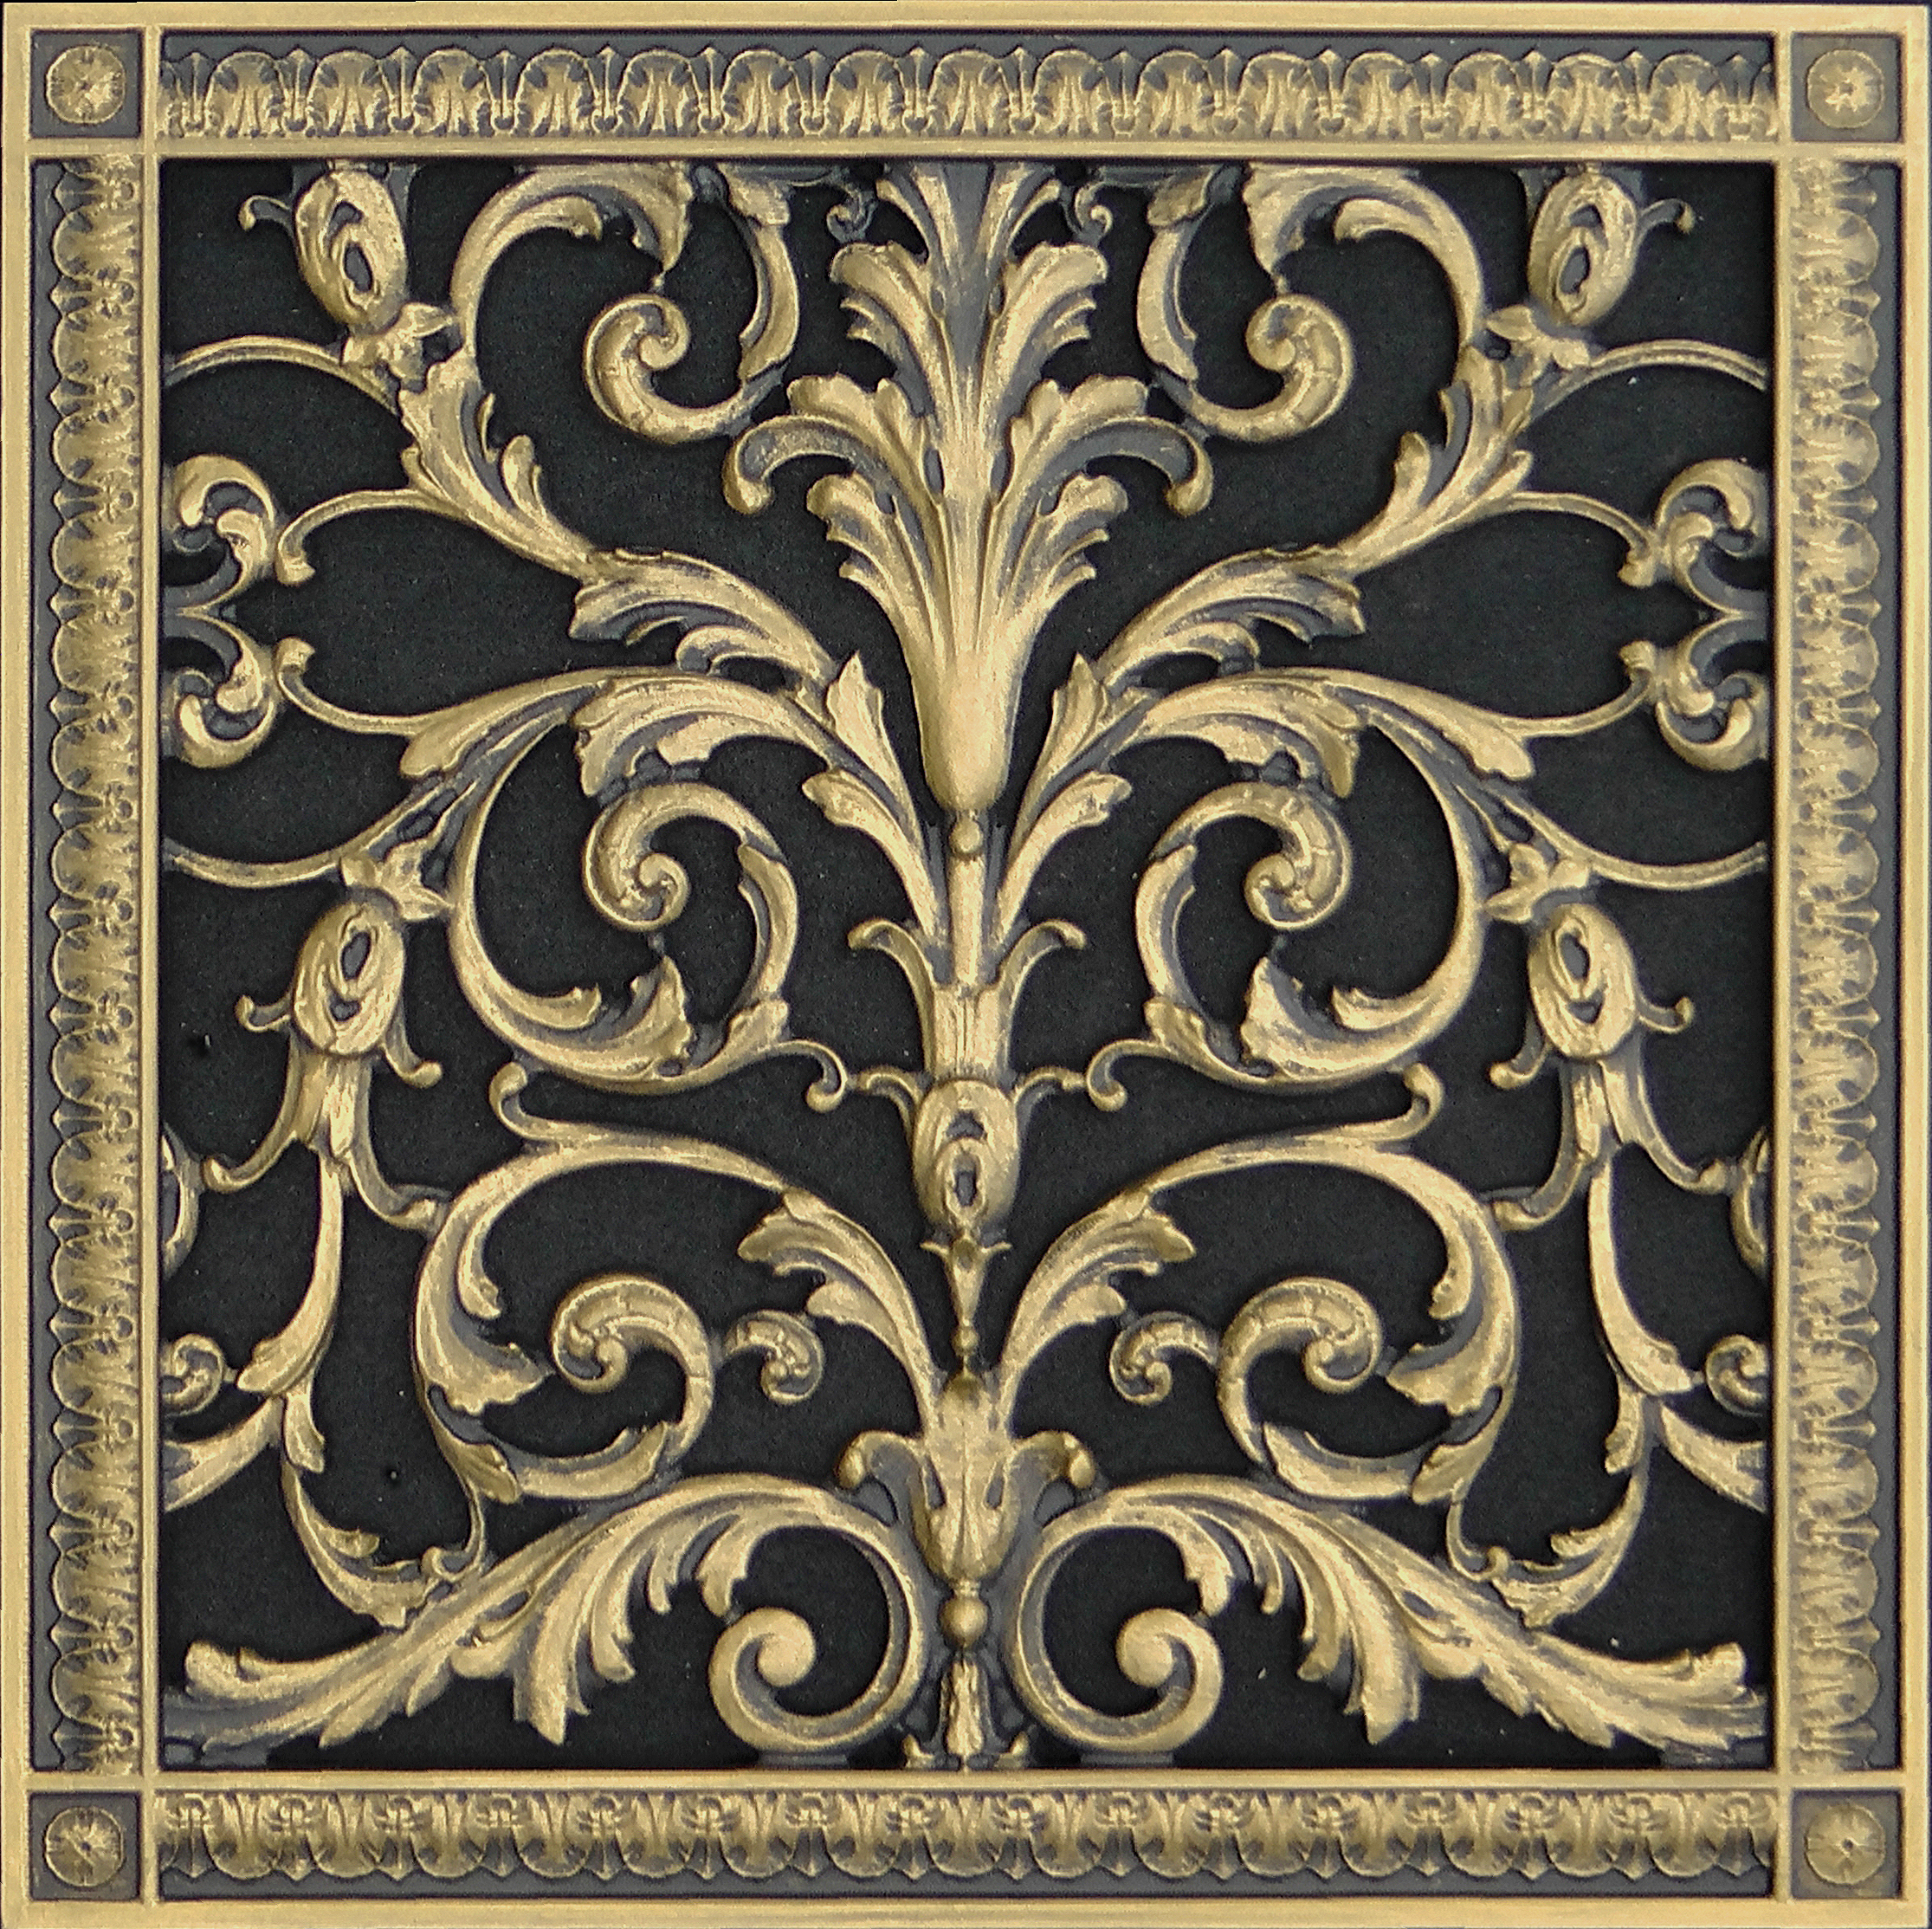 Decorative vent cover 14x14 in Louis XIV style in Antique Brass finish